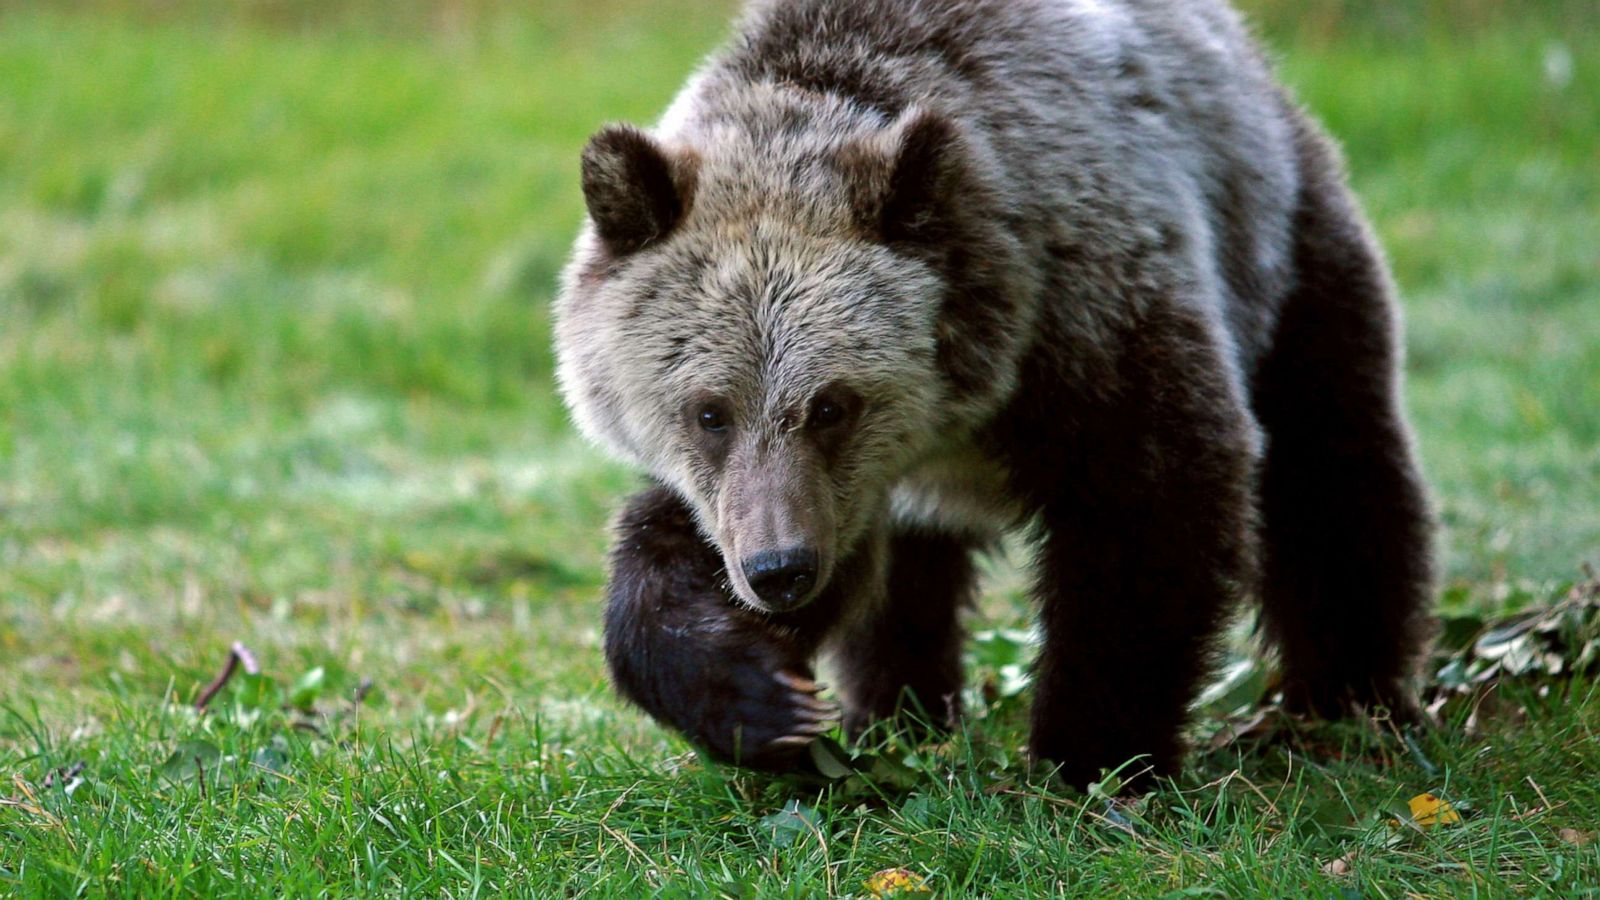 Black bear attacks on humans are rare but often begin as scuffles